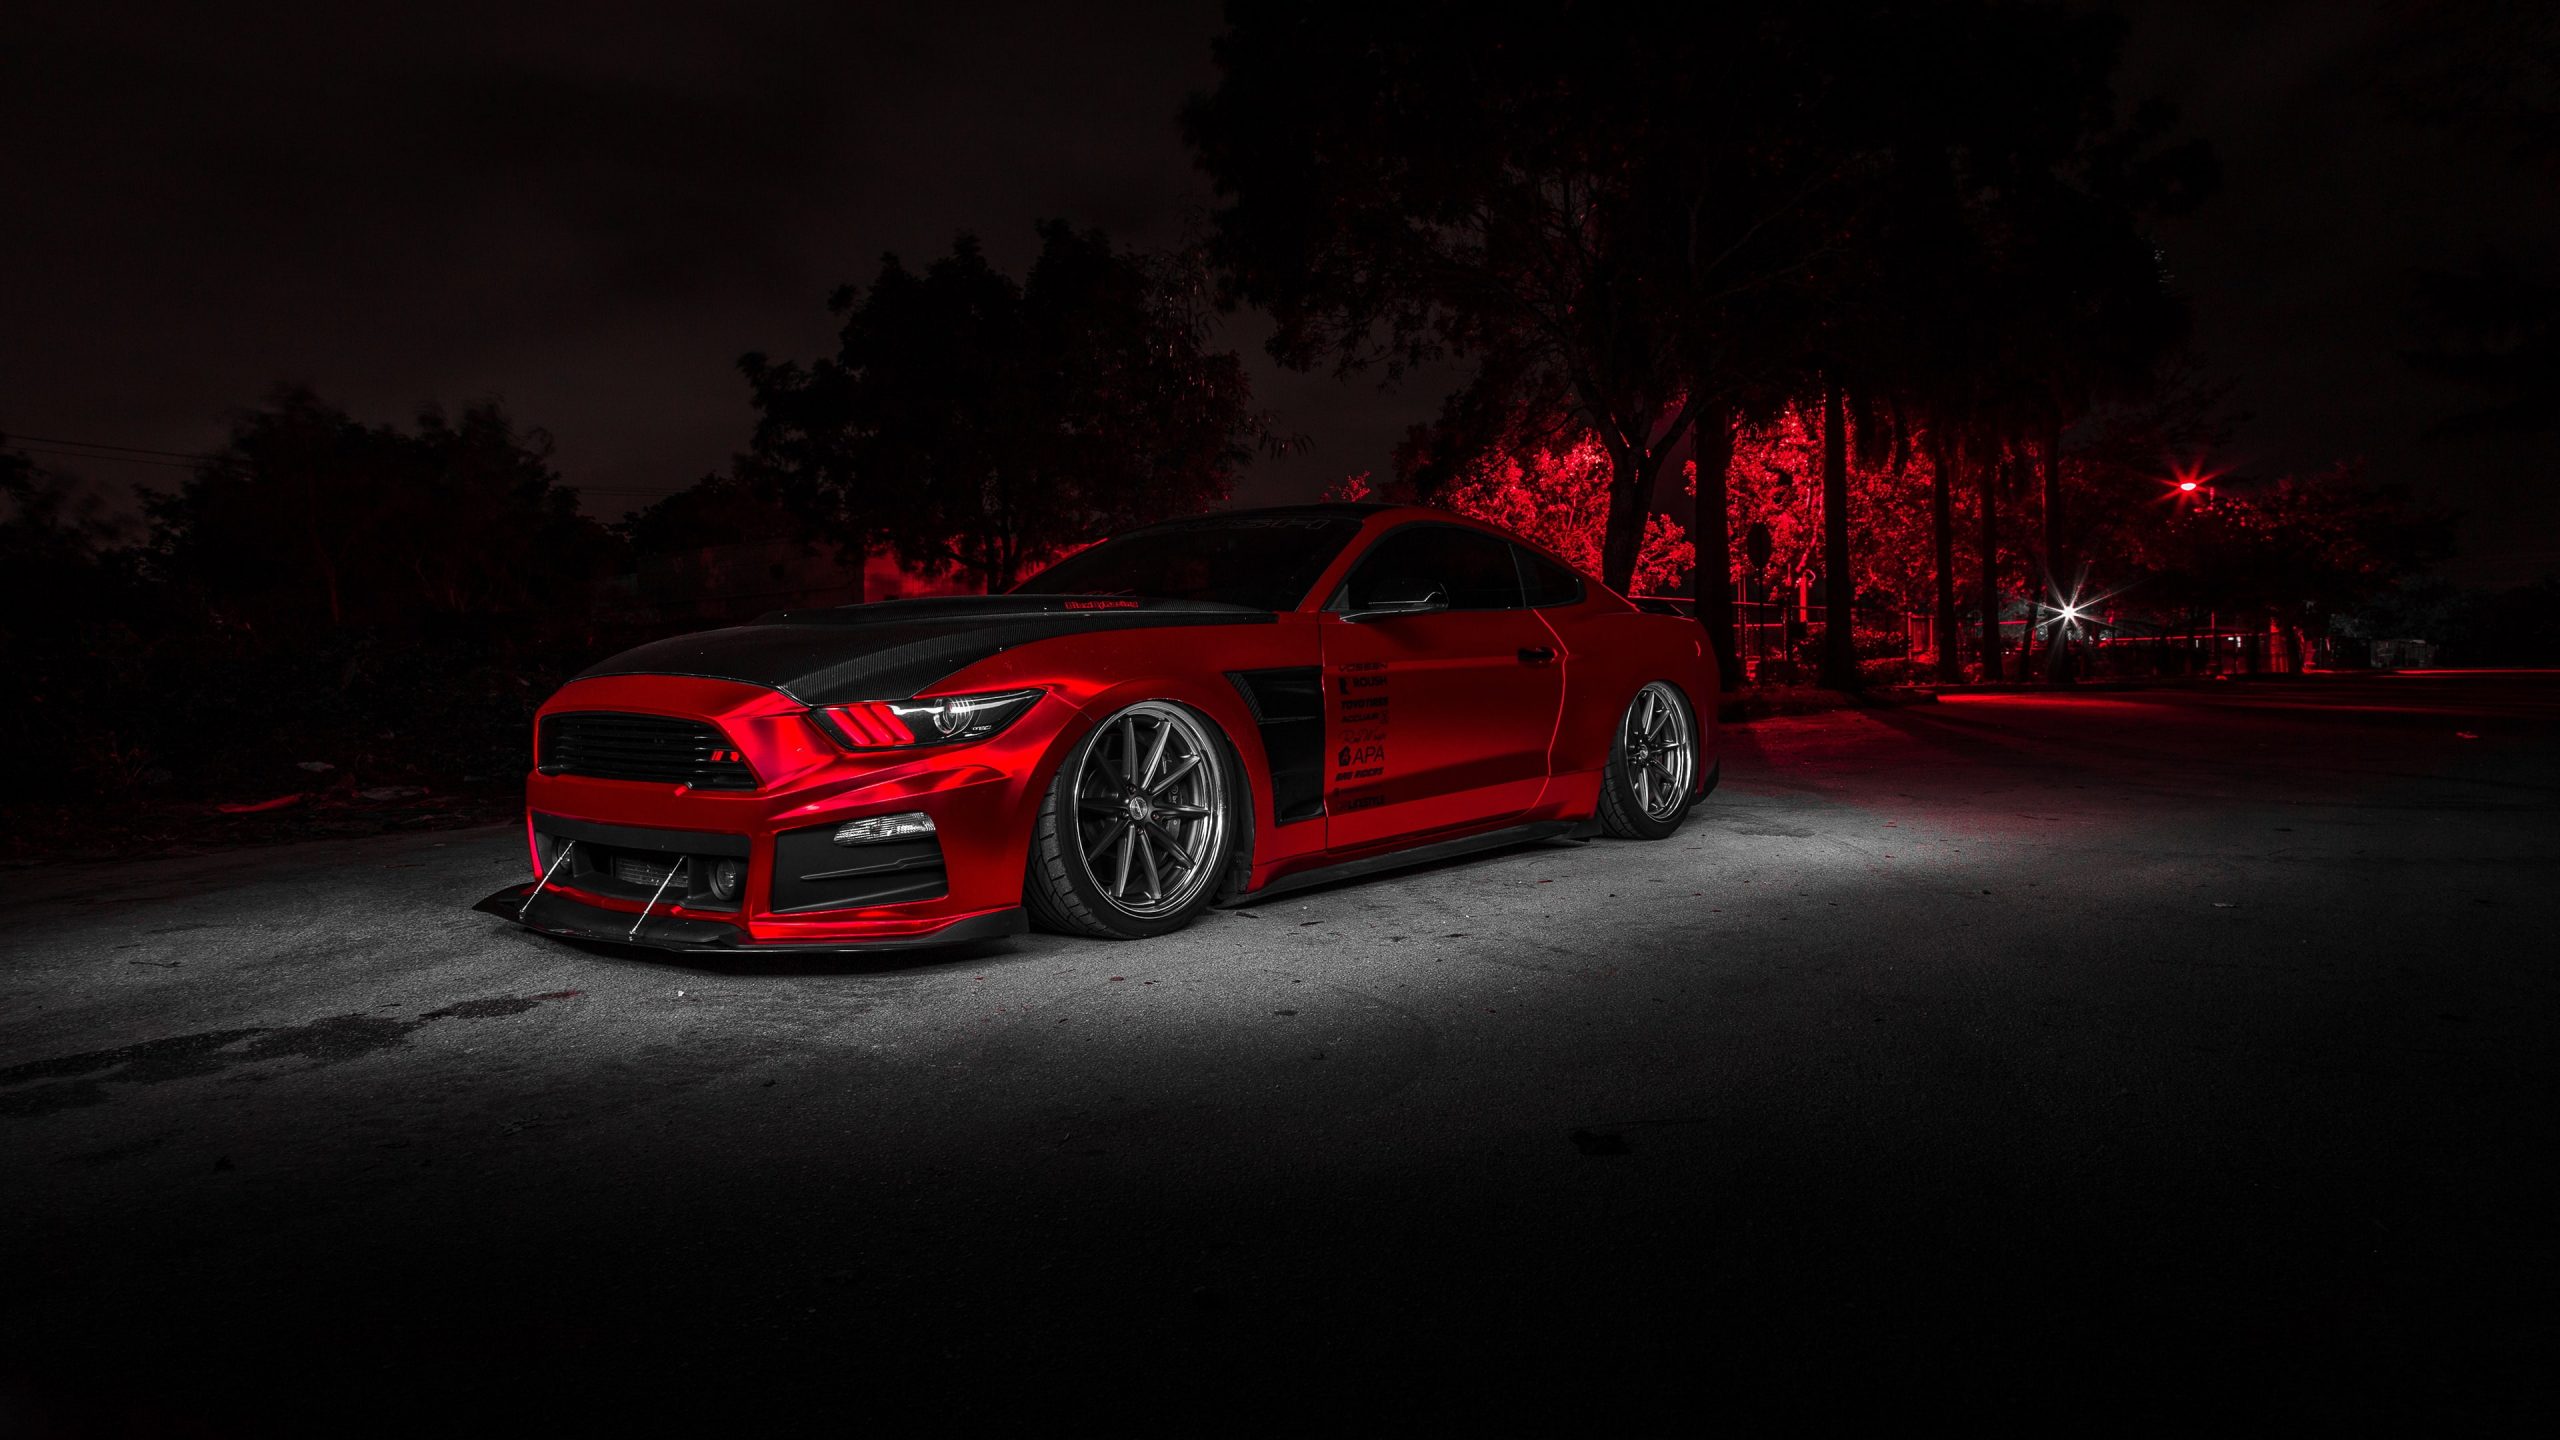 Wallpaper Red car, design, ford mustang, automotive design, vehicle, sports car